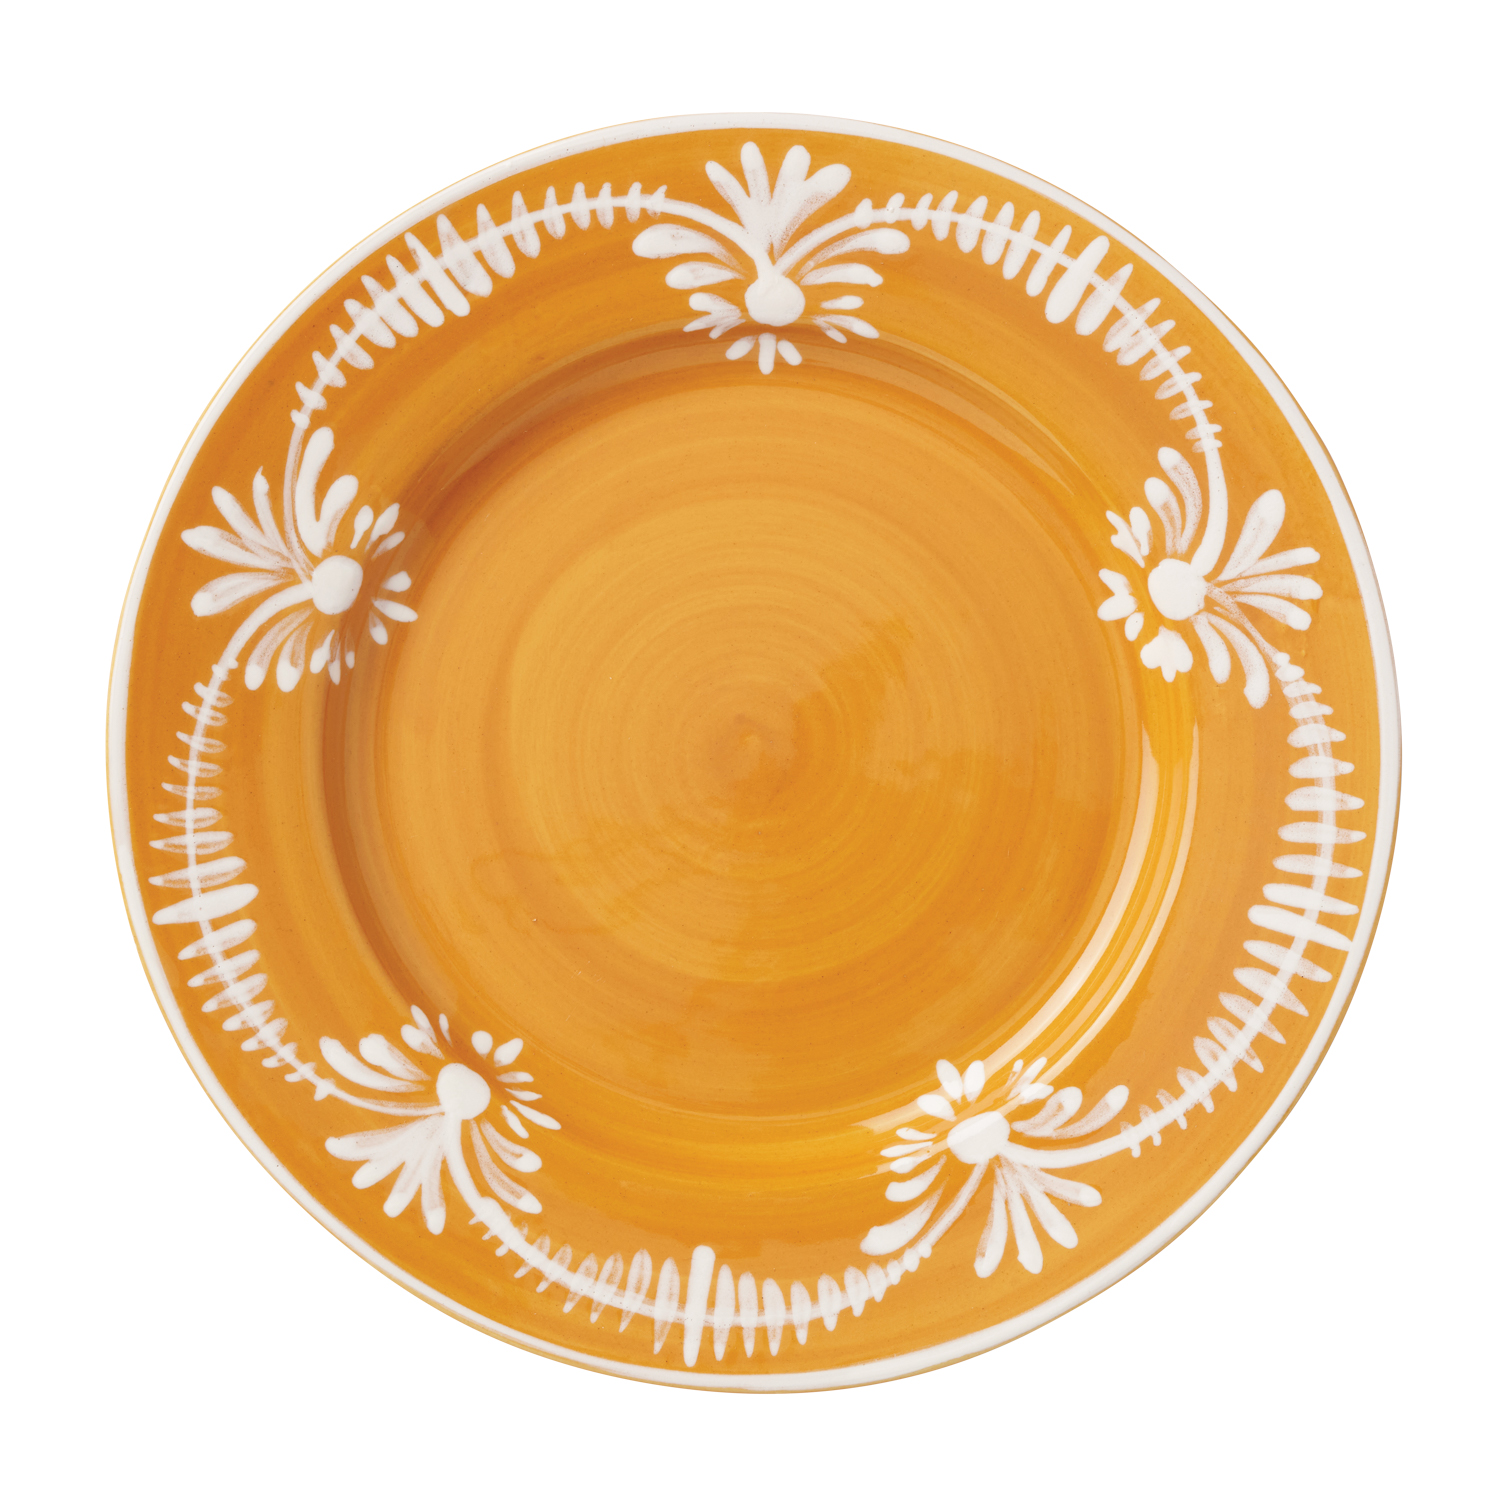 marigold dinner plate with painted white flower decorations